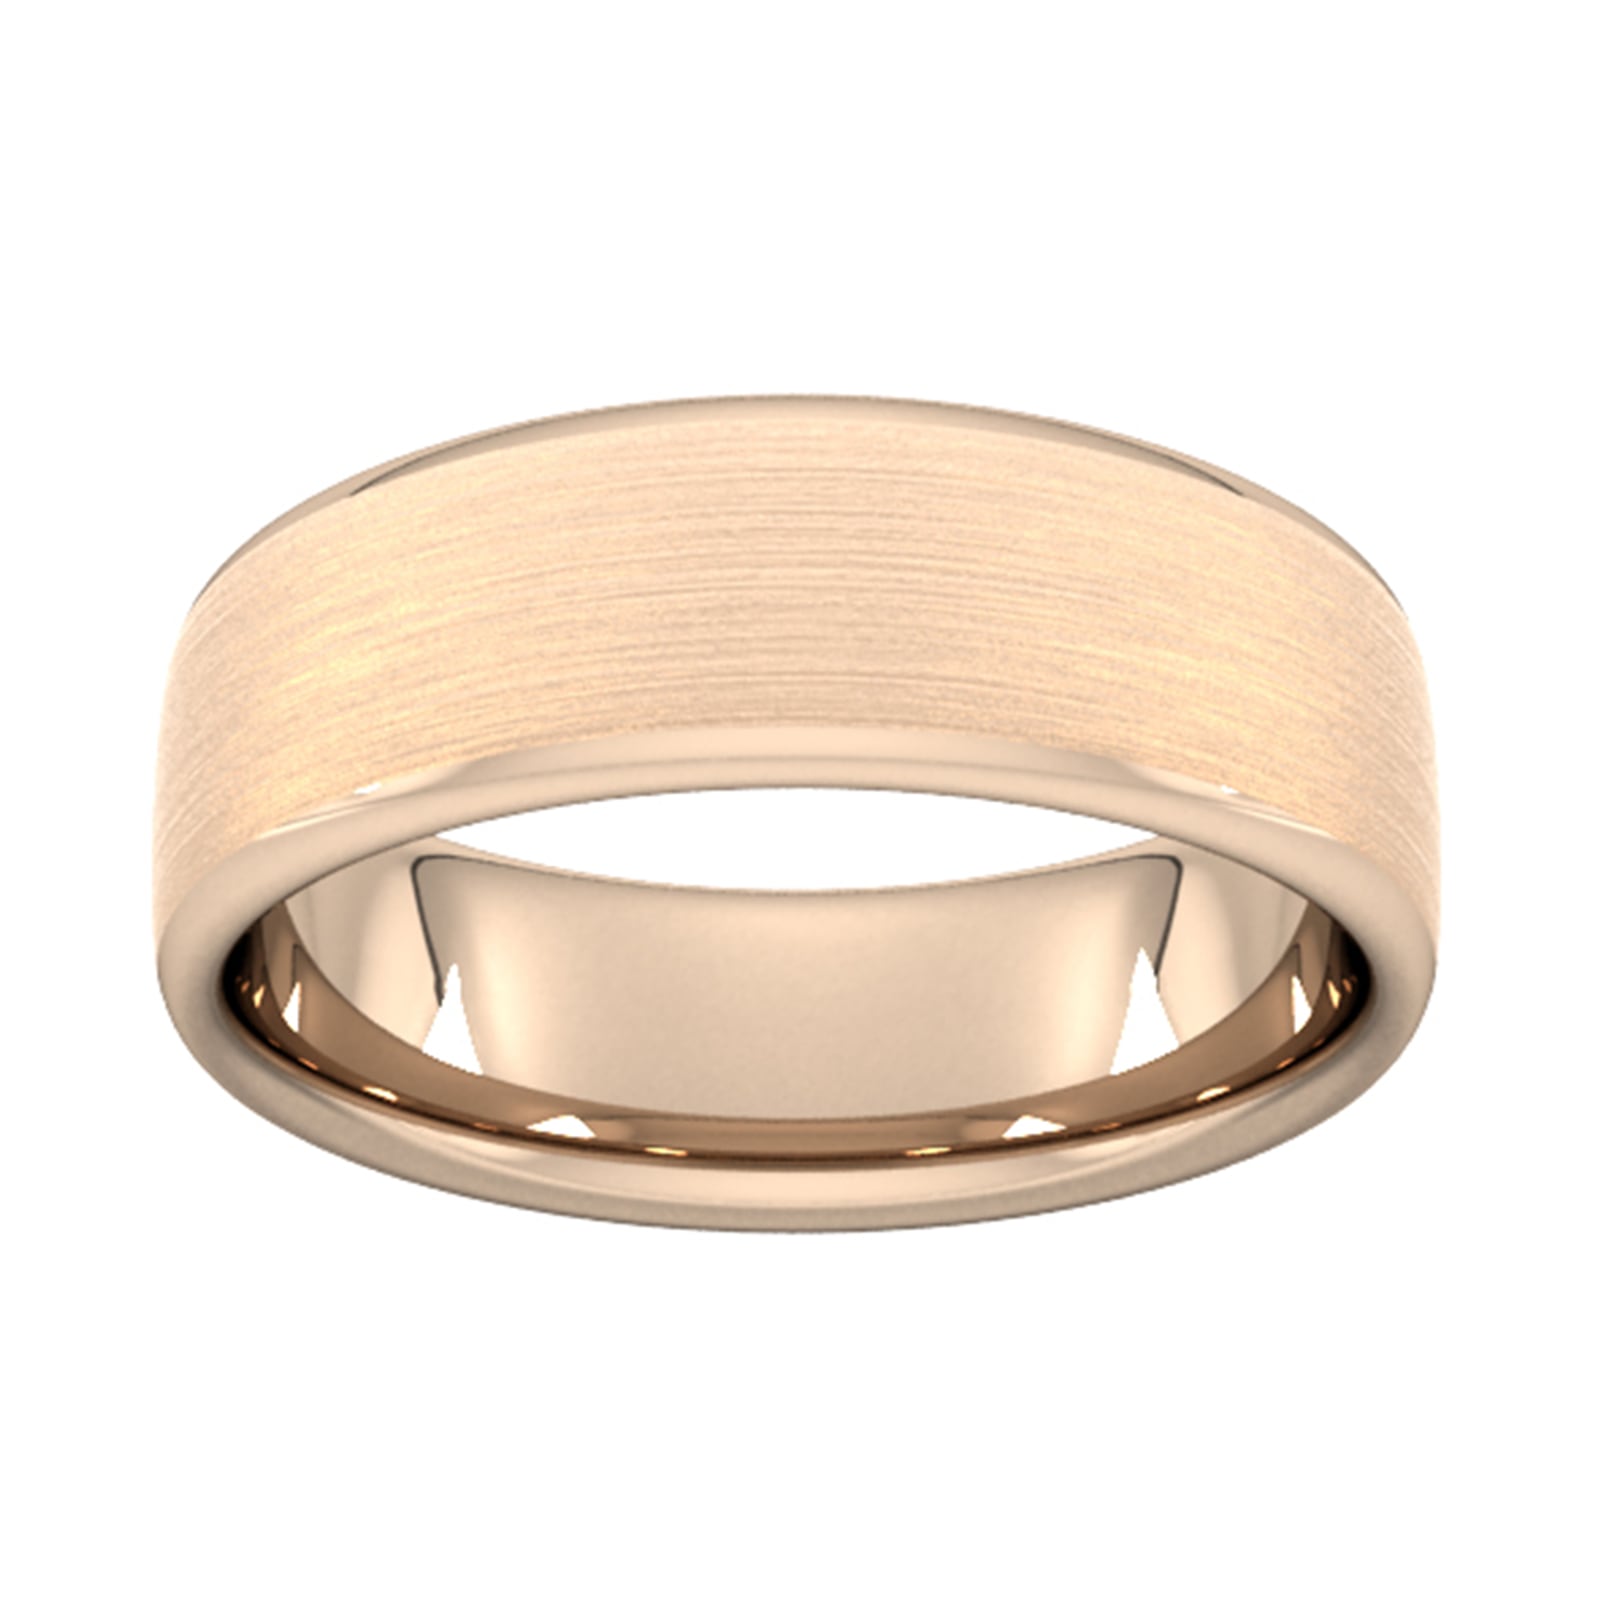 7mm Traditional Court Heavy Matt Finished Wedding Ring In 9 Carat Rose Gold - Ring Size W